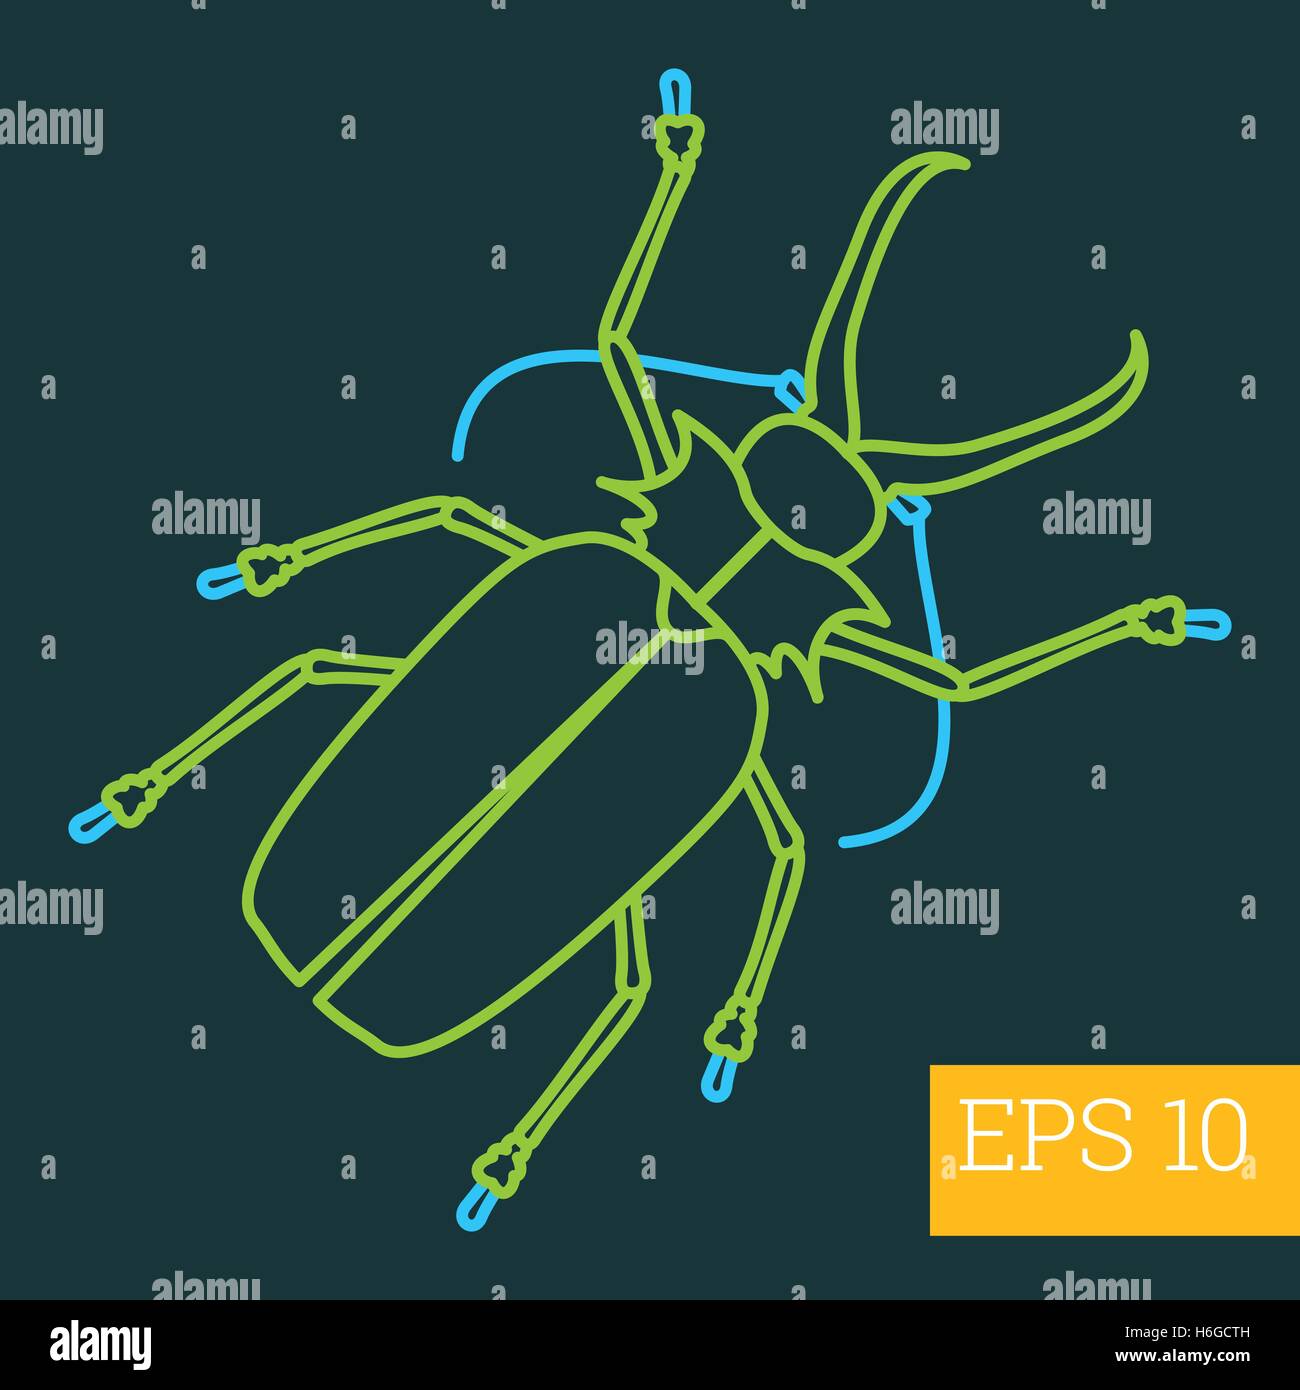 capnodis insect outline vector Stock Vector